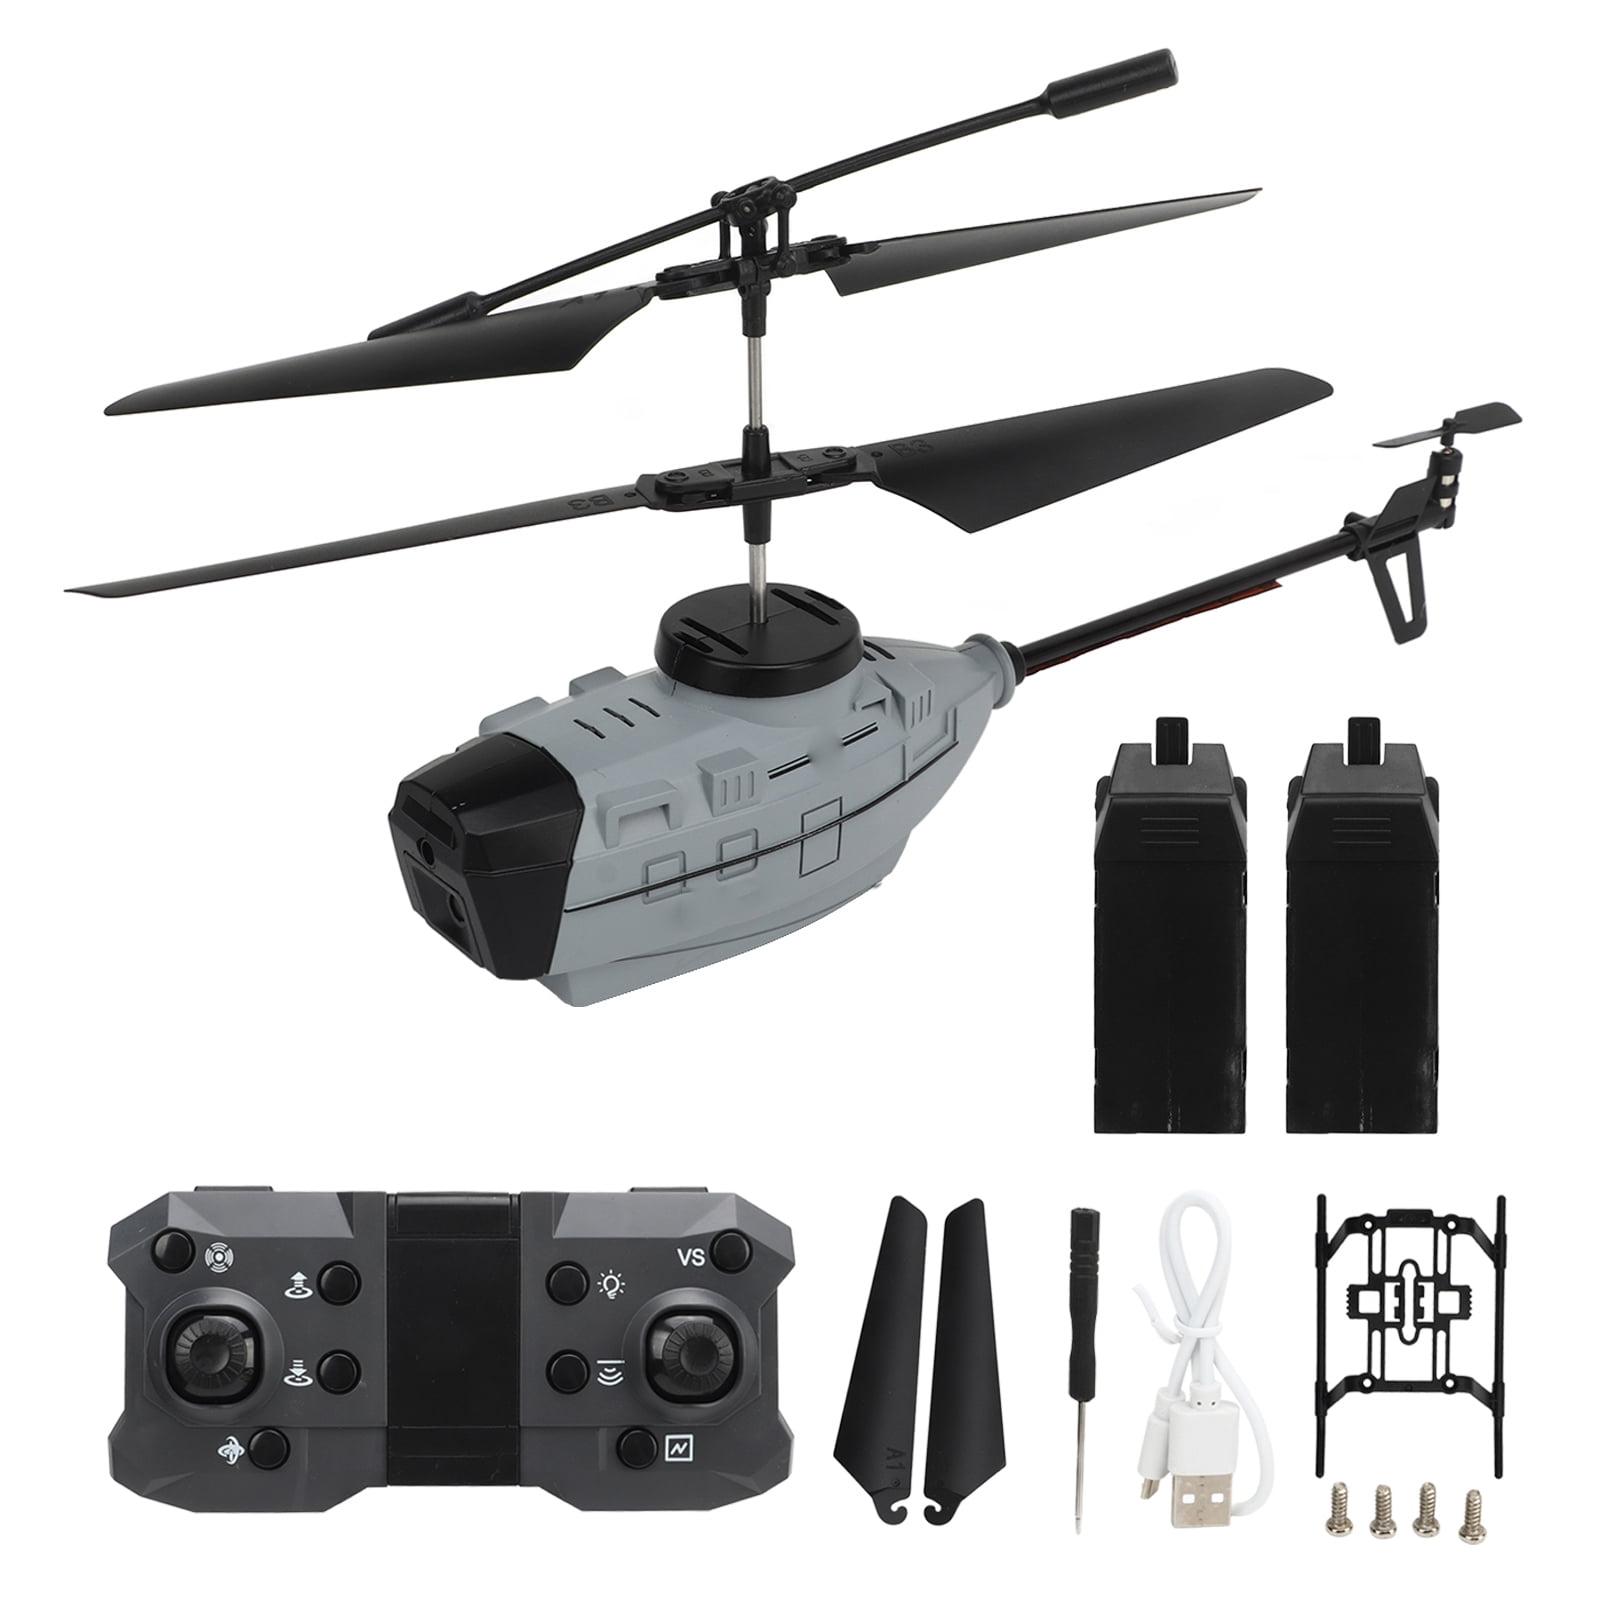 Ky202 Helicopter: Get flying with the affordable KY202 helicopter